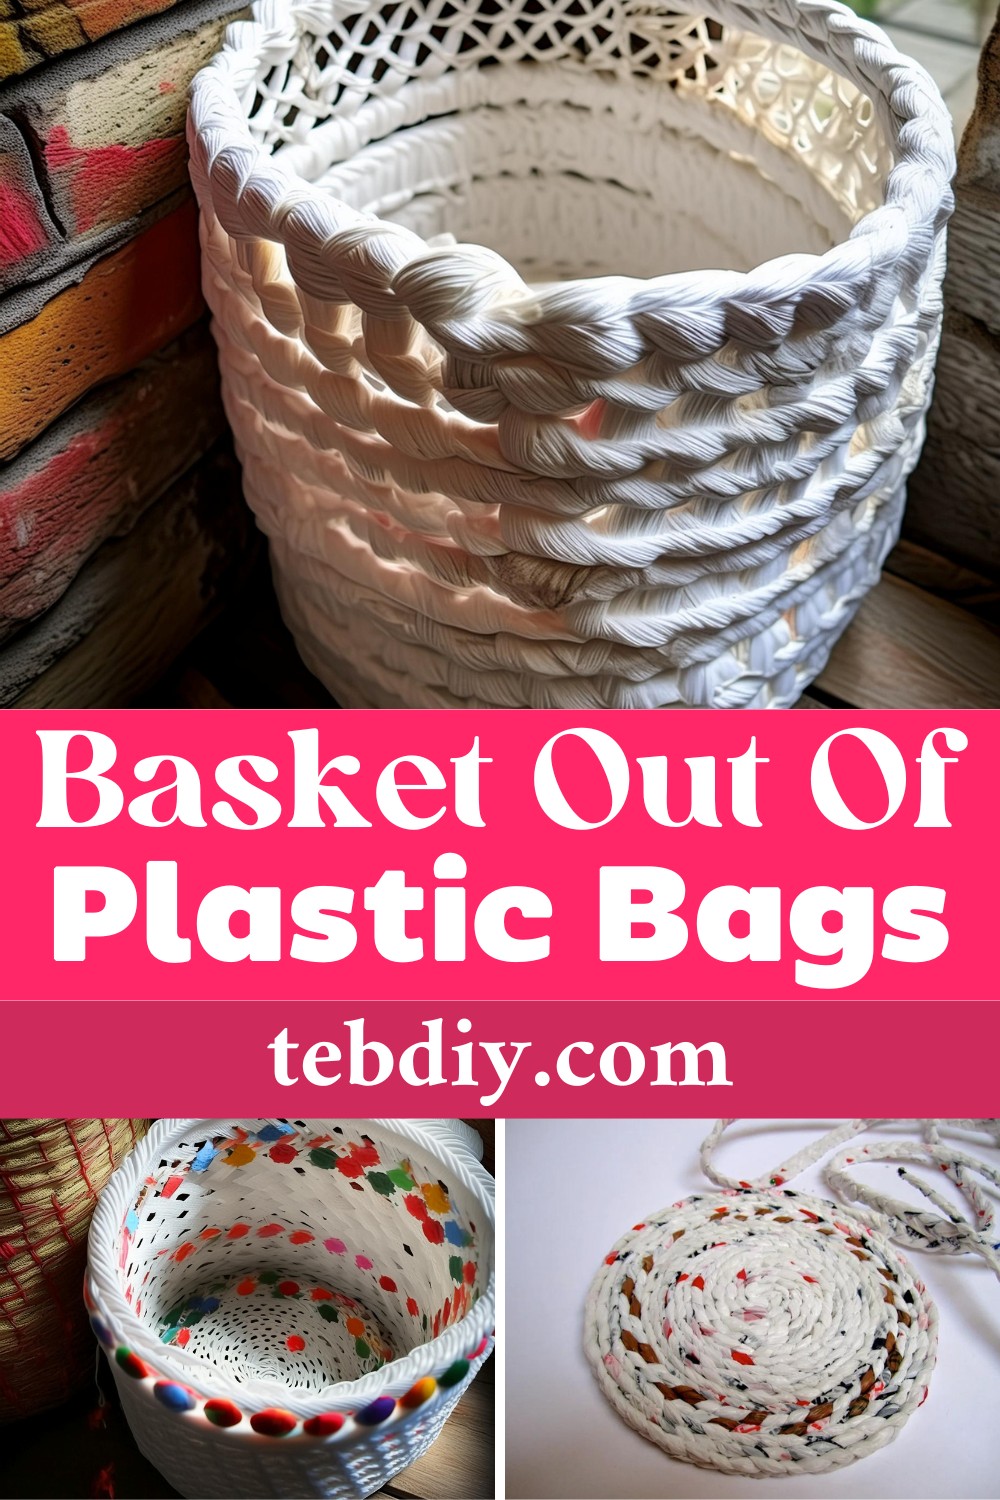 Make Basket Out Of Plastic Bags